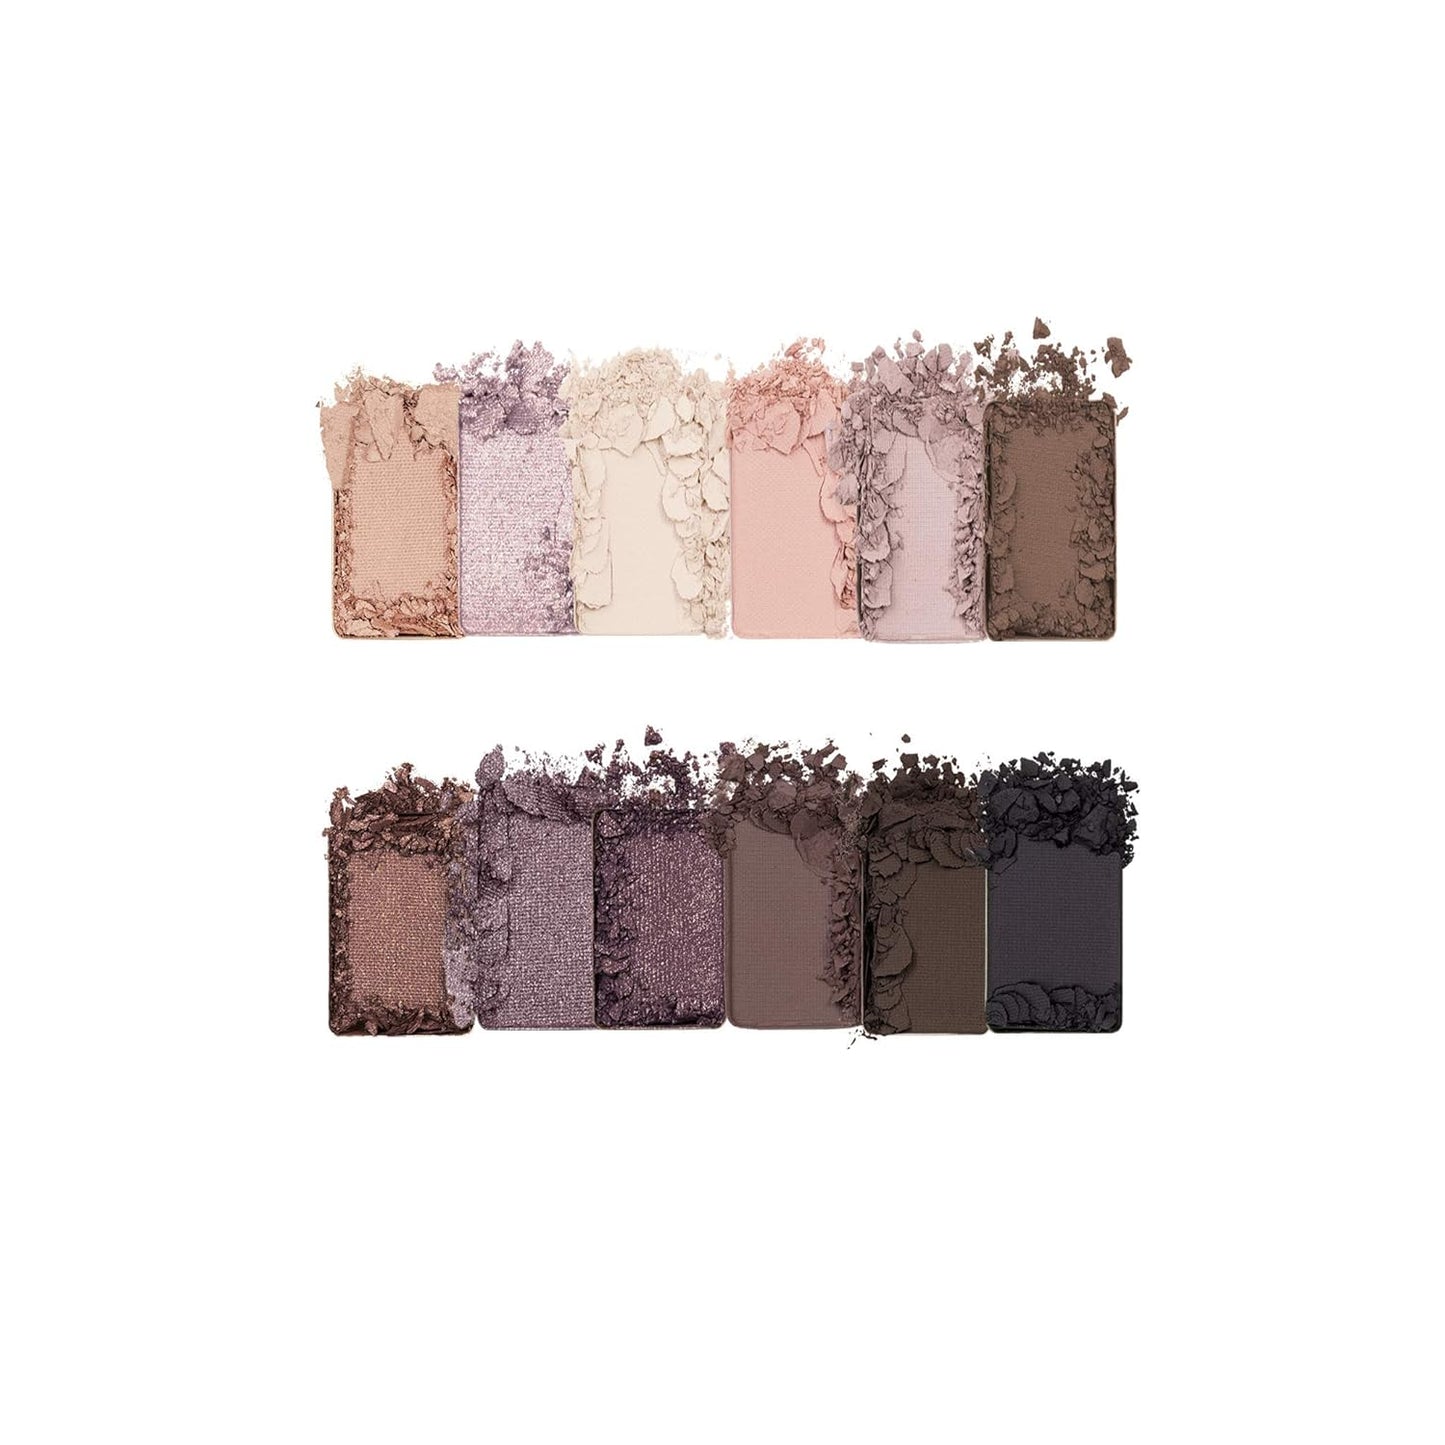 Milani Soft & Sultry Eyeshadow Palette (0.48 Ounce) 12 Cruelty-Free Smoky Matte & Metallic Eyeshadow Colors for Long-Lasting Wear